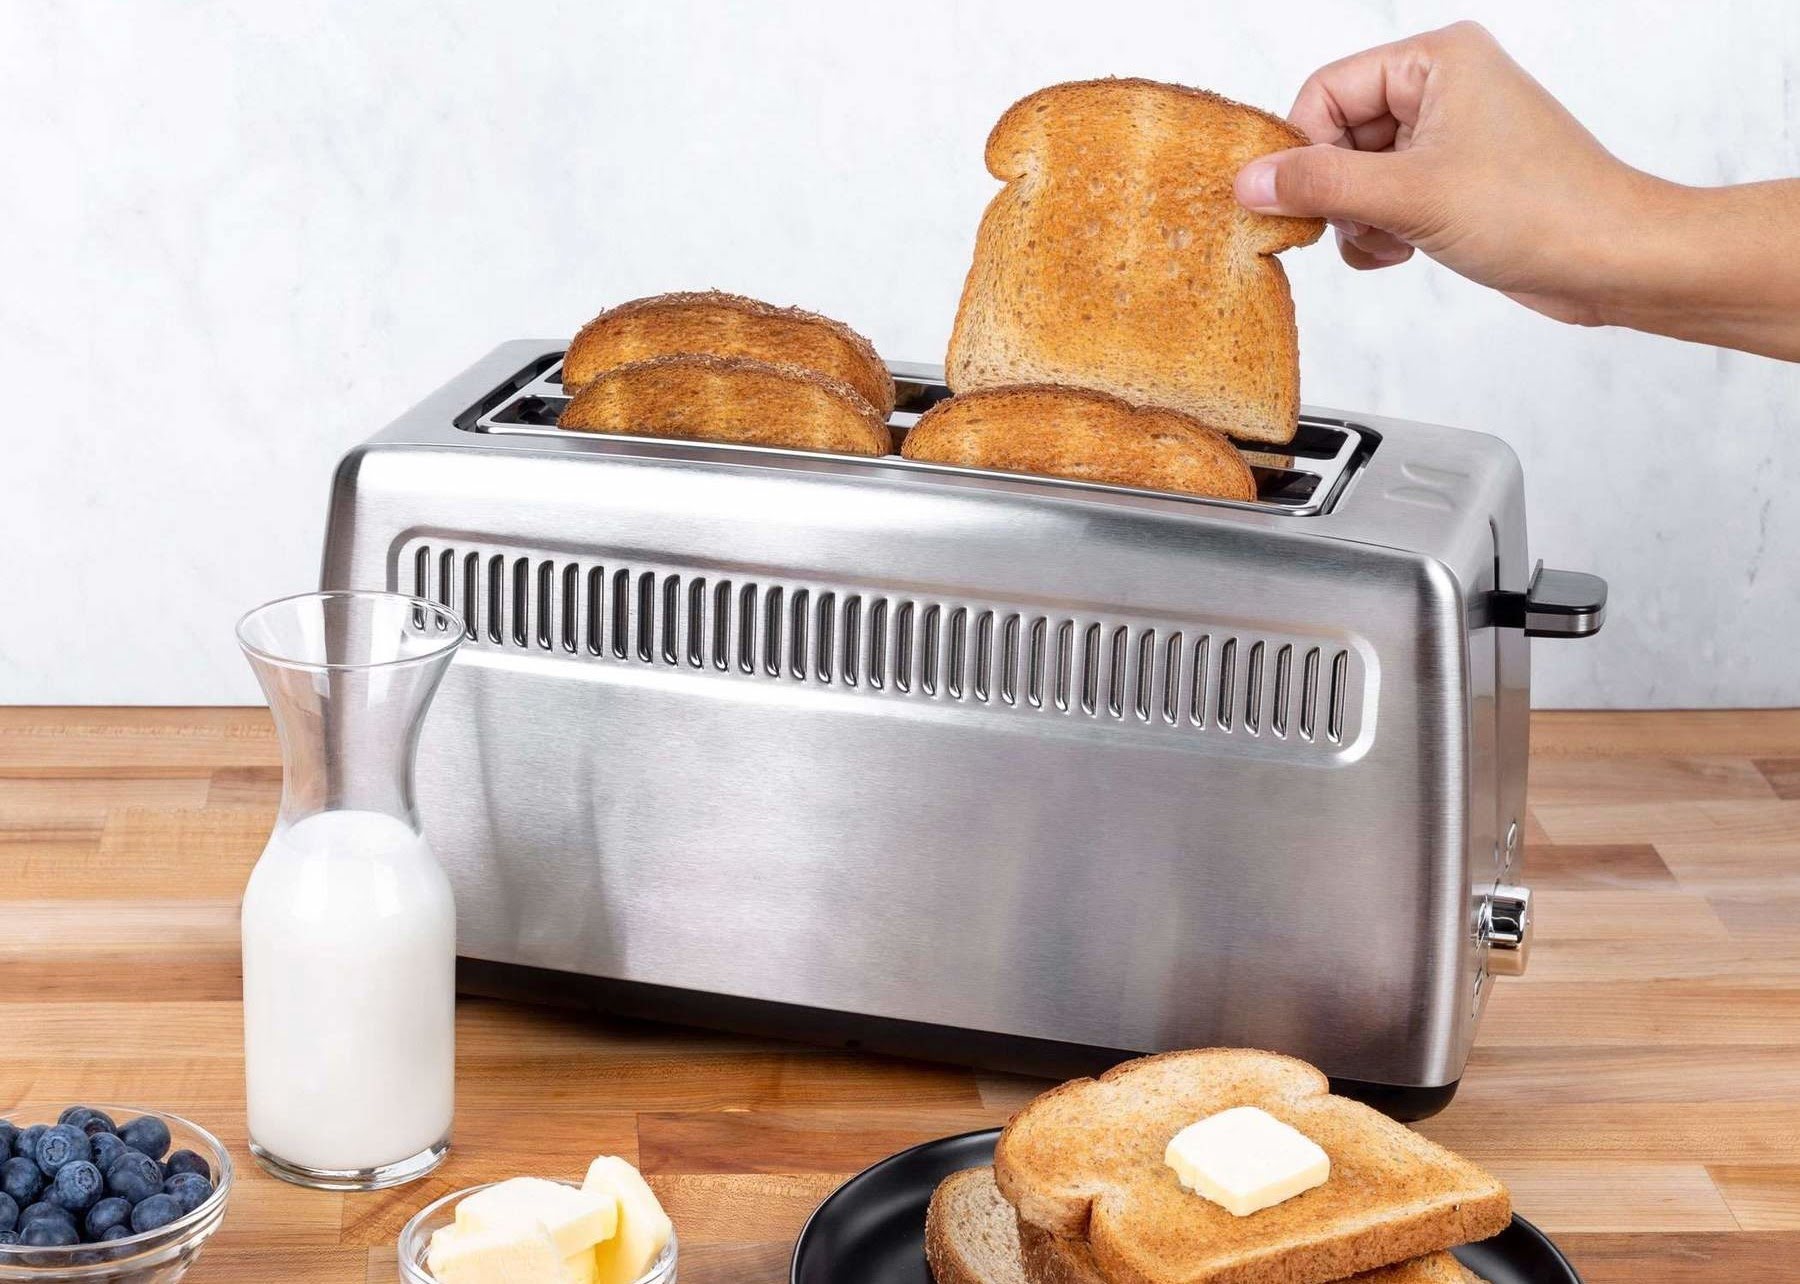 Long Slot Toaster 4 Slice, Stainless Steel Retro Toasters Best Rated Prime  with 1.25 Extra Wide Slot and Defrost/Reheat/Cancel Function/6 Browning